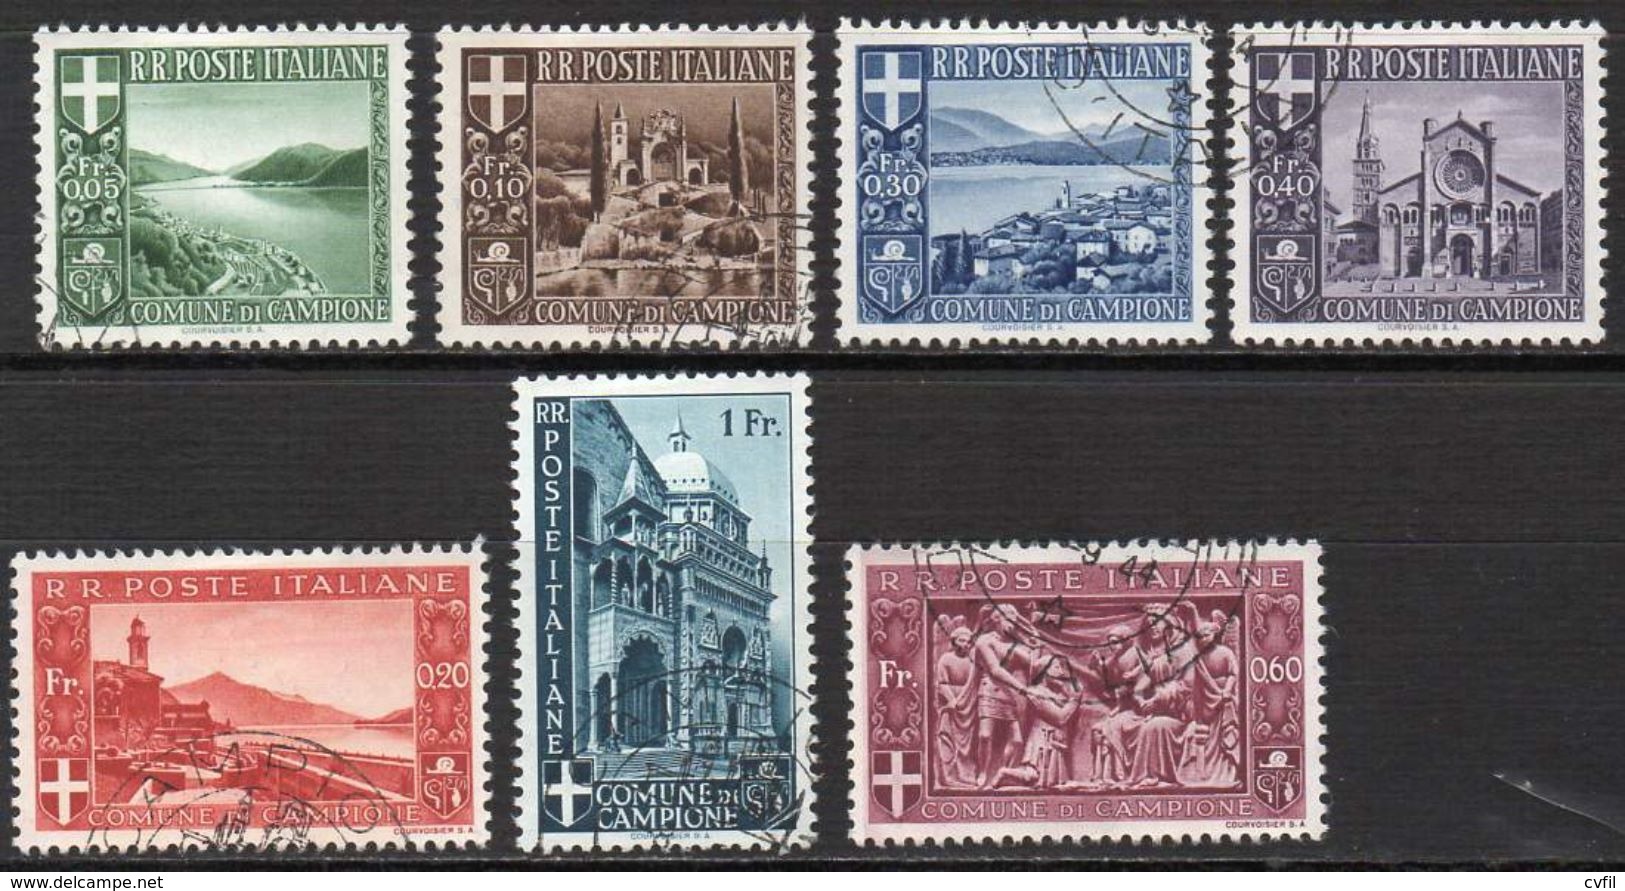 CAMPIONE D'ITALIA - The Second Complete Set Of 7 Values, Very Fine Used - Local And Autonomous Issues